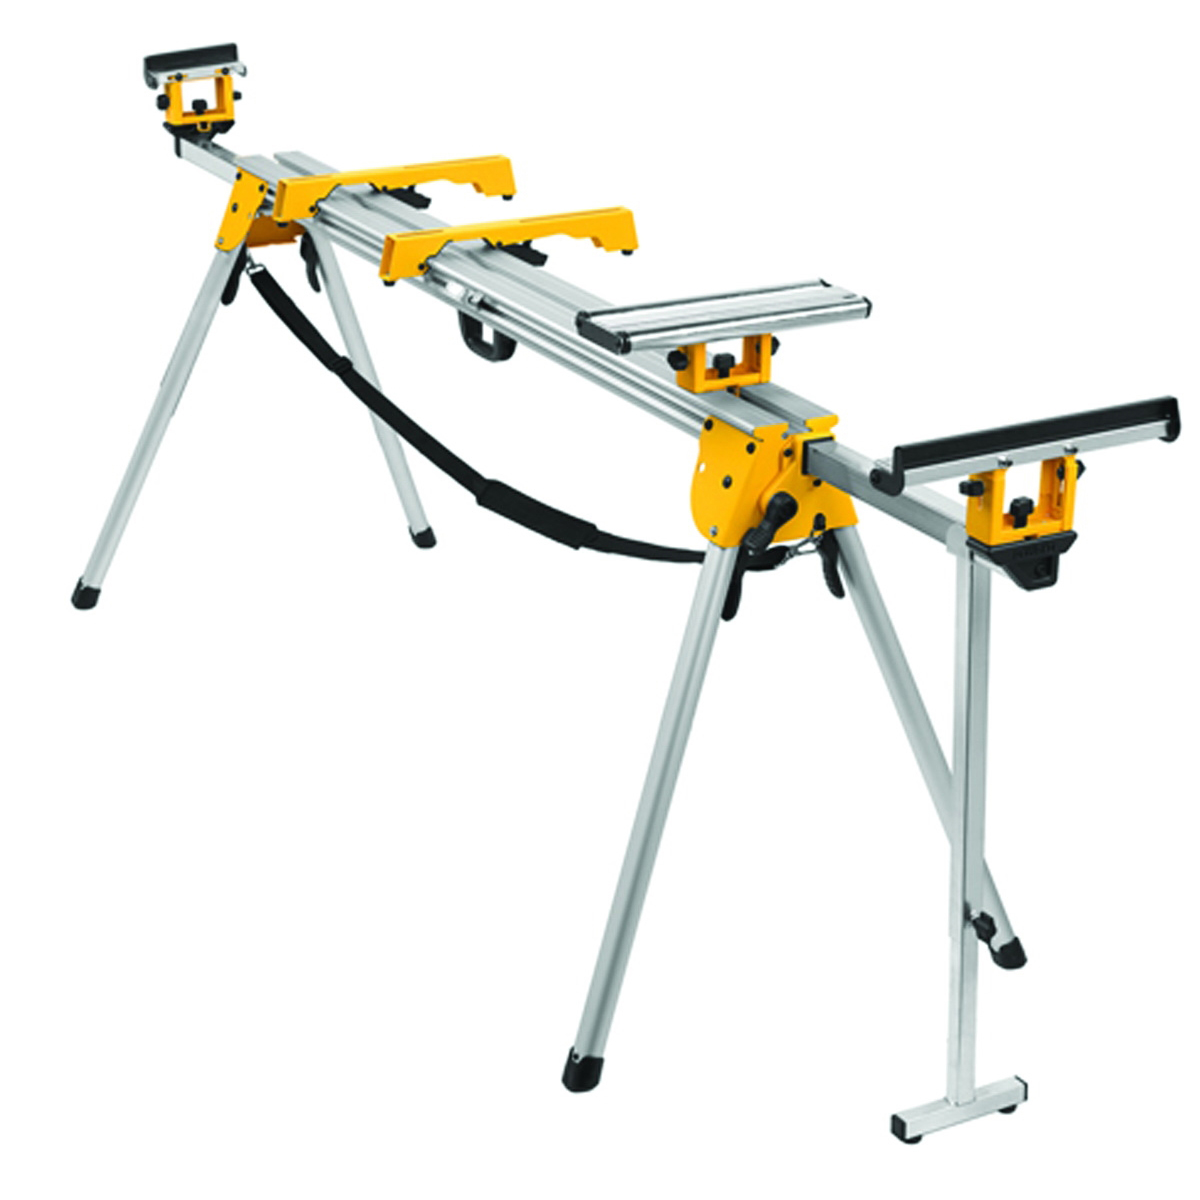 DeWALT DWX723 Miter Saw Stand, 500 lb, 151 in W Stand, 32 in H Stand, Aluminum, Black/Yellow - 4